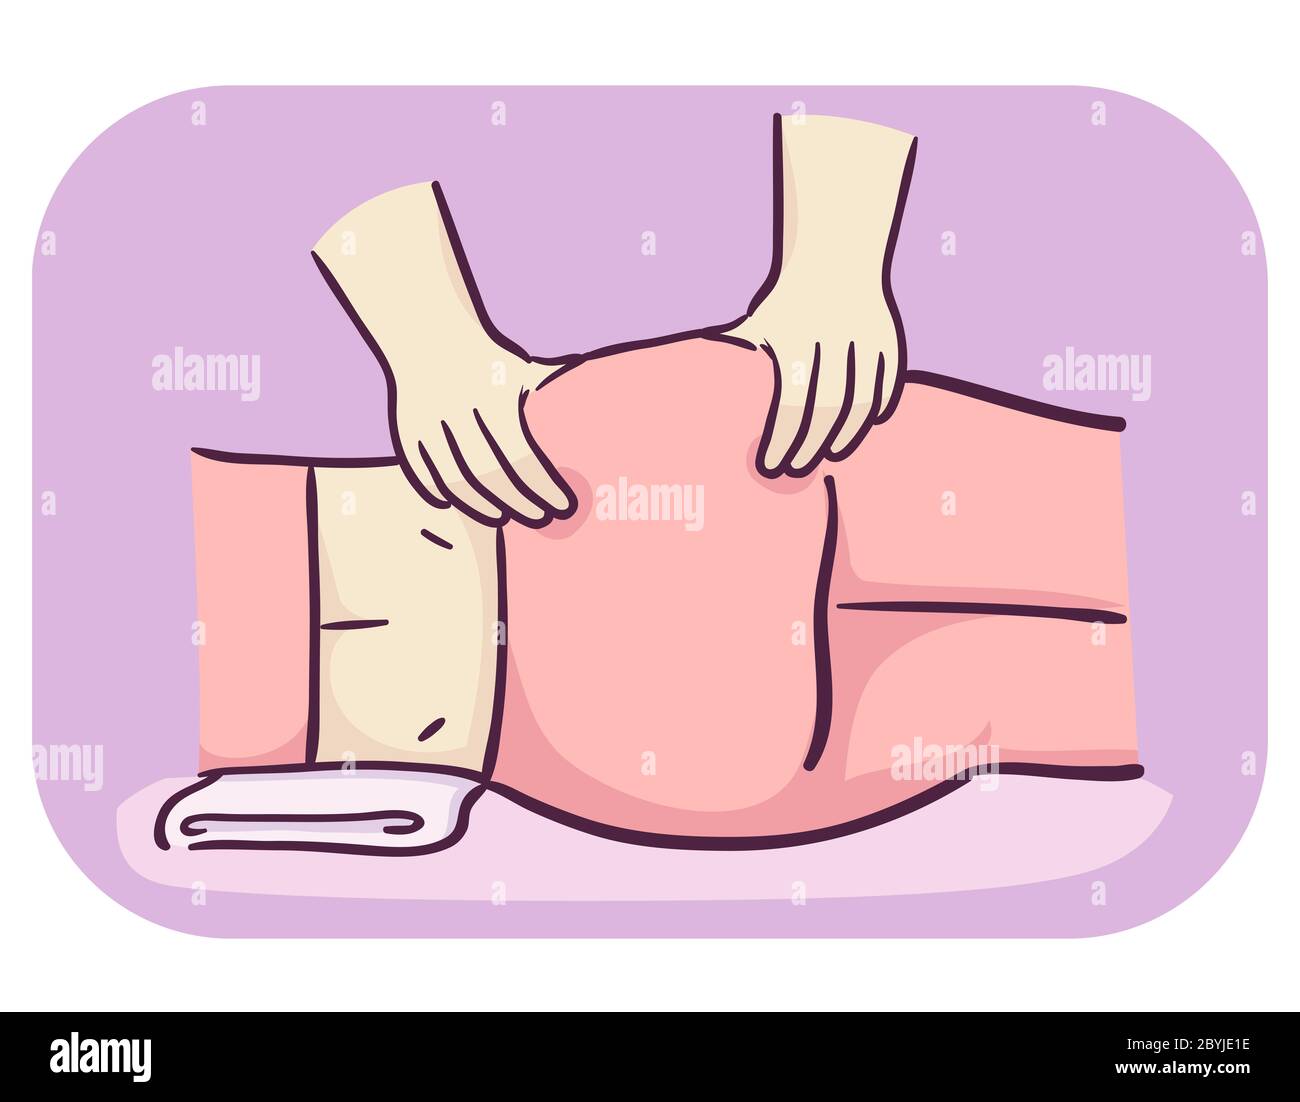 Illustration of a Massage Therapist Hands Massaging Patient with Hip Pain, Musculoskeletal Pain Stock Photo